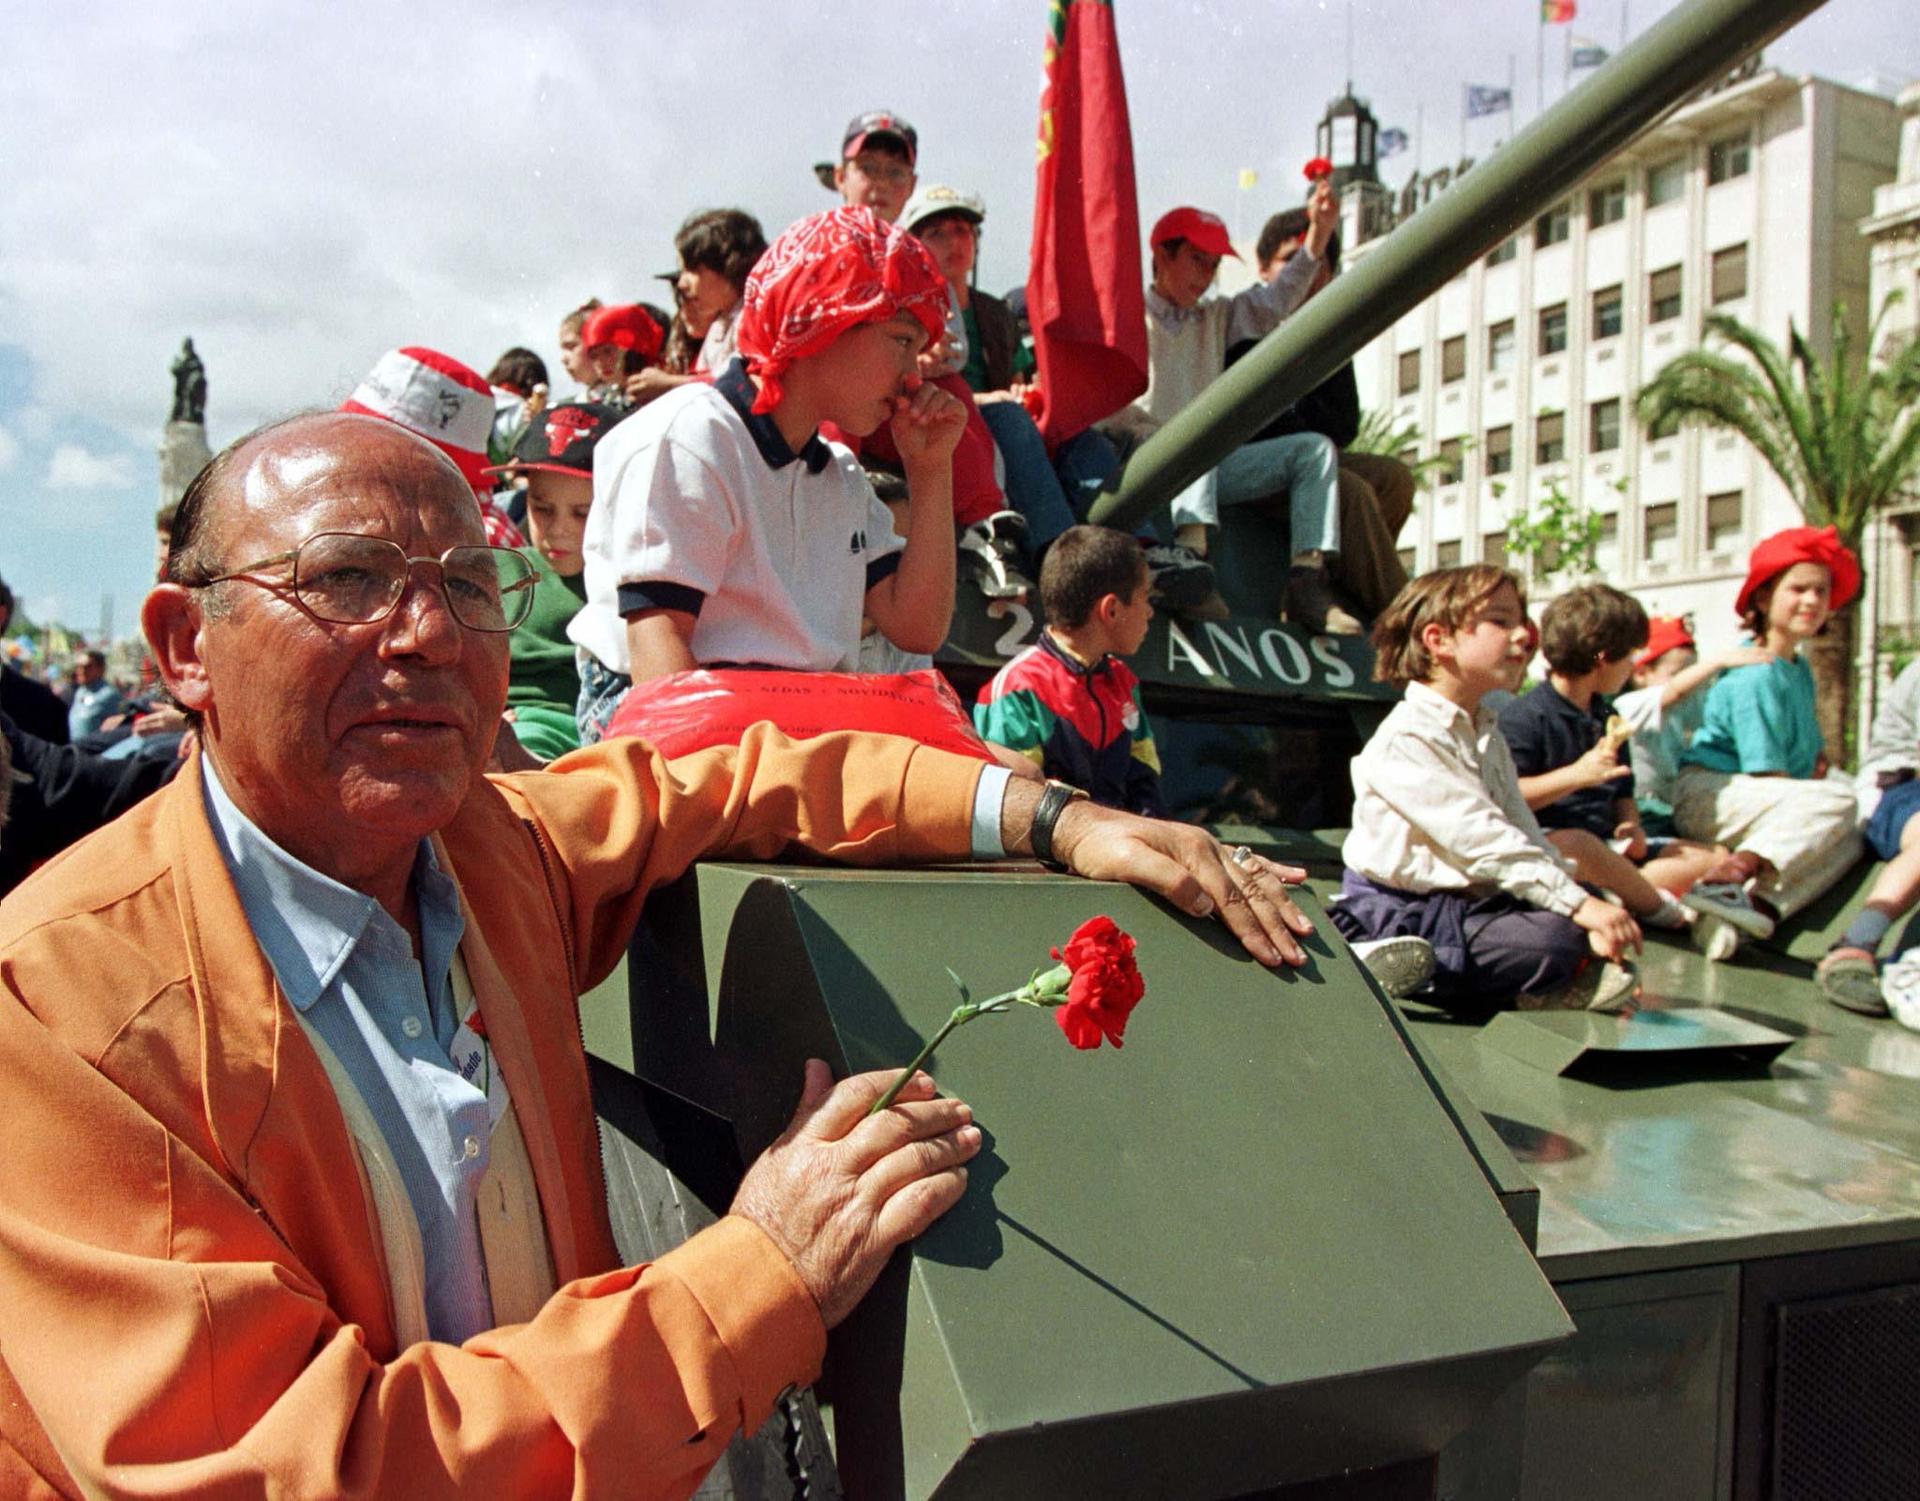 An old Portuguese man holding a carnation flower rides on the side of a carnival armoured car surrounded by children during a parade in Lisbon celebrating the 1974 Carnation Revolution April 25.